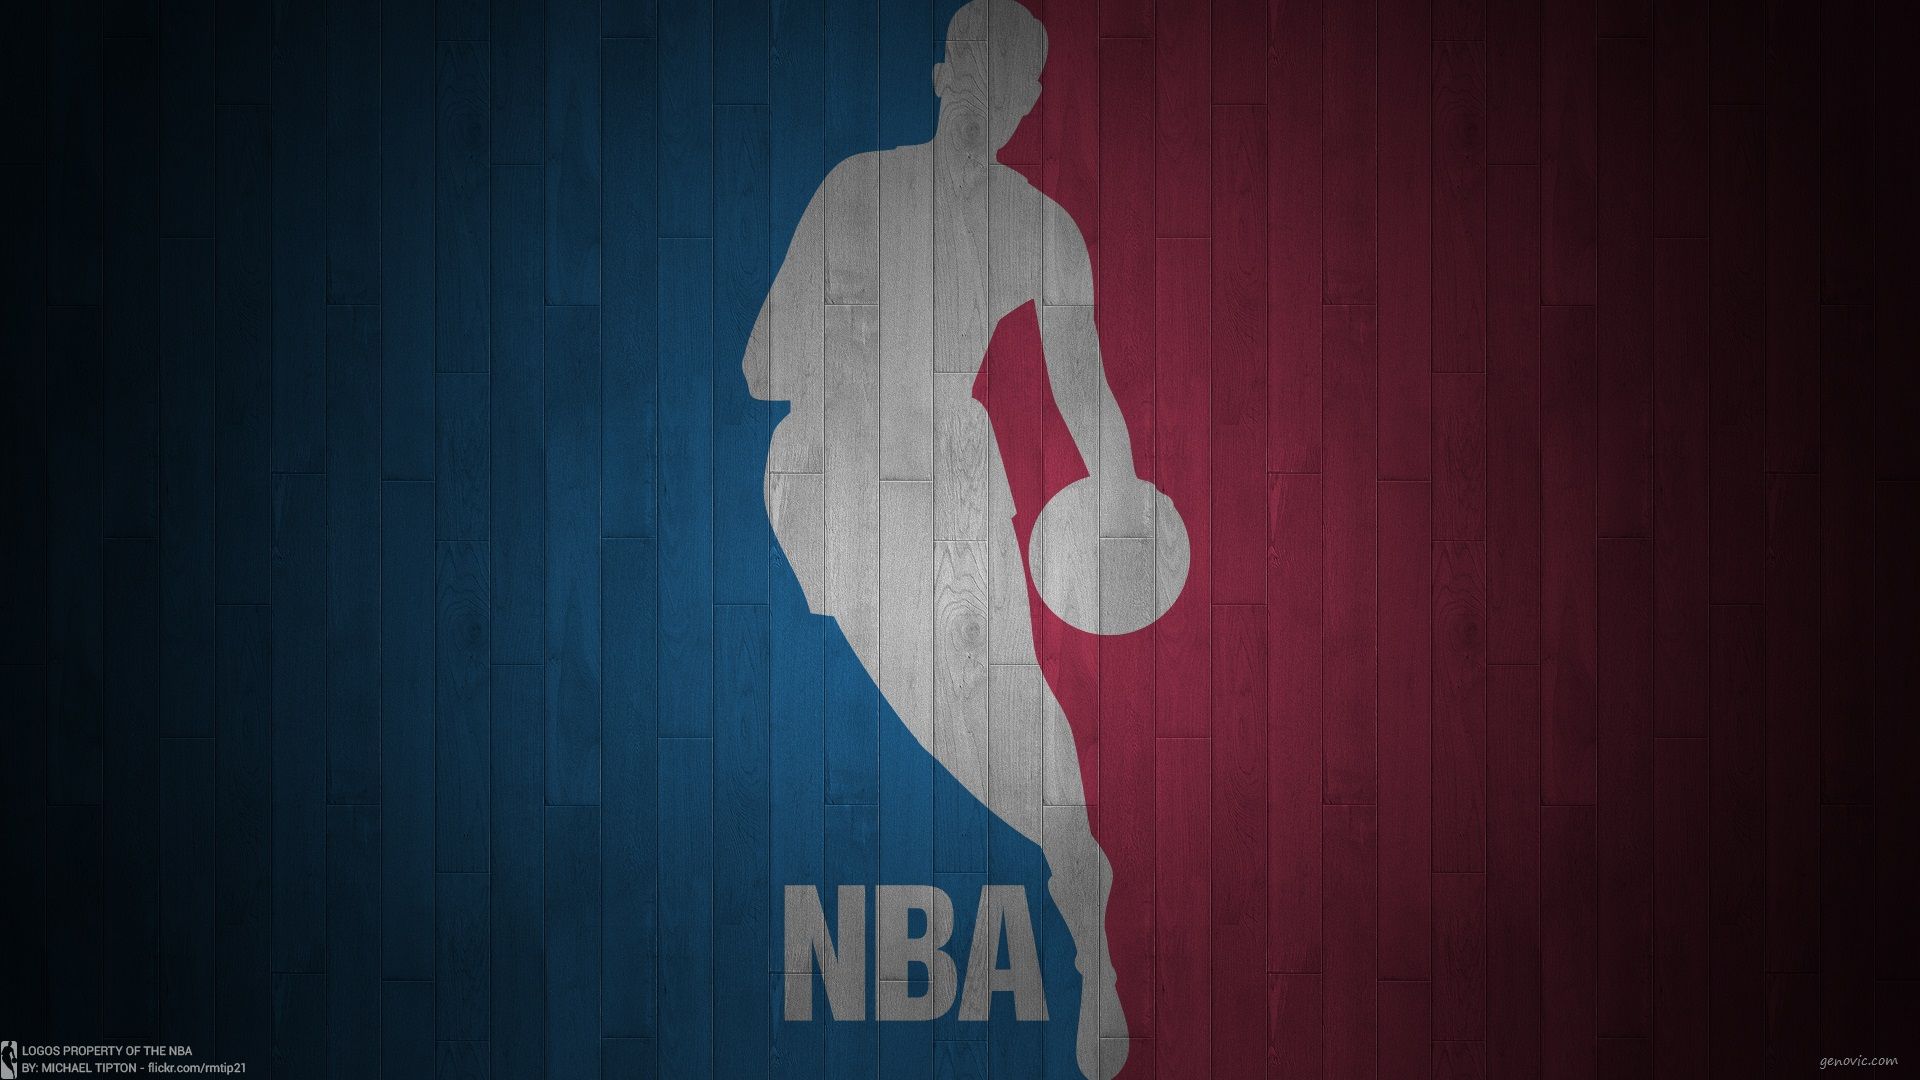 What Game is the NBA Playing?